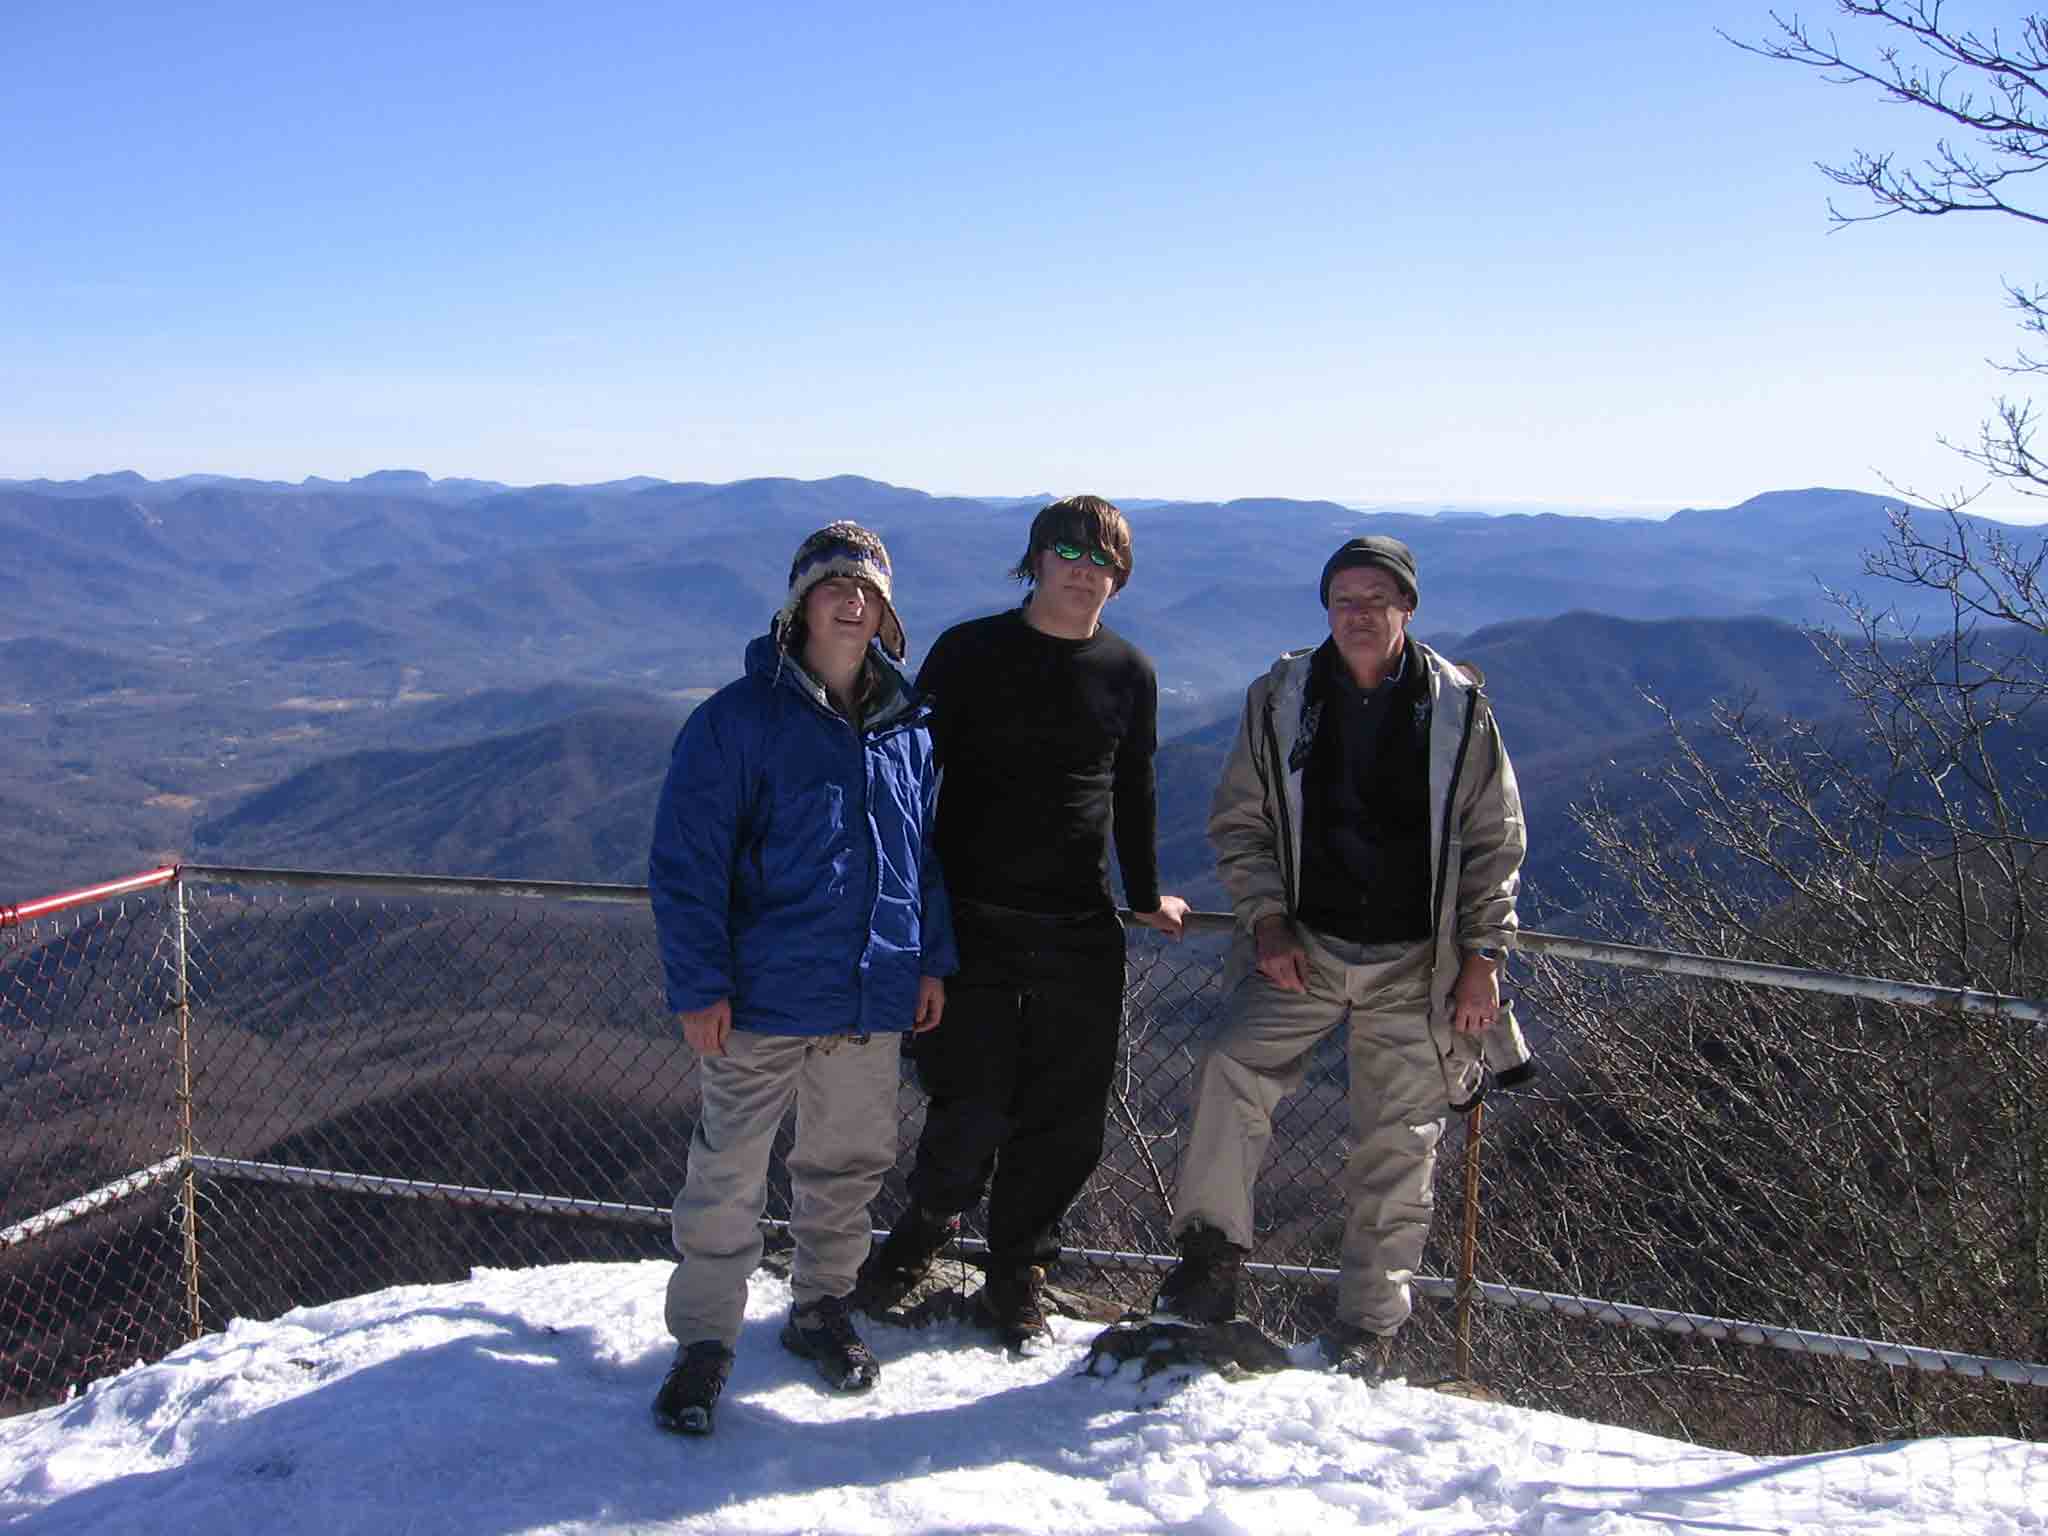 mm 6.6 - Photo break on Albert Mtn. on the way to Standing Indian Mtn. 12/27/06.  Courtesy dsouth@mac.com